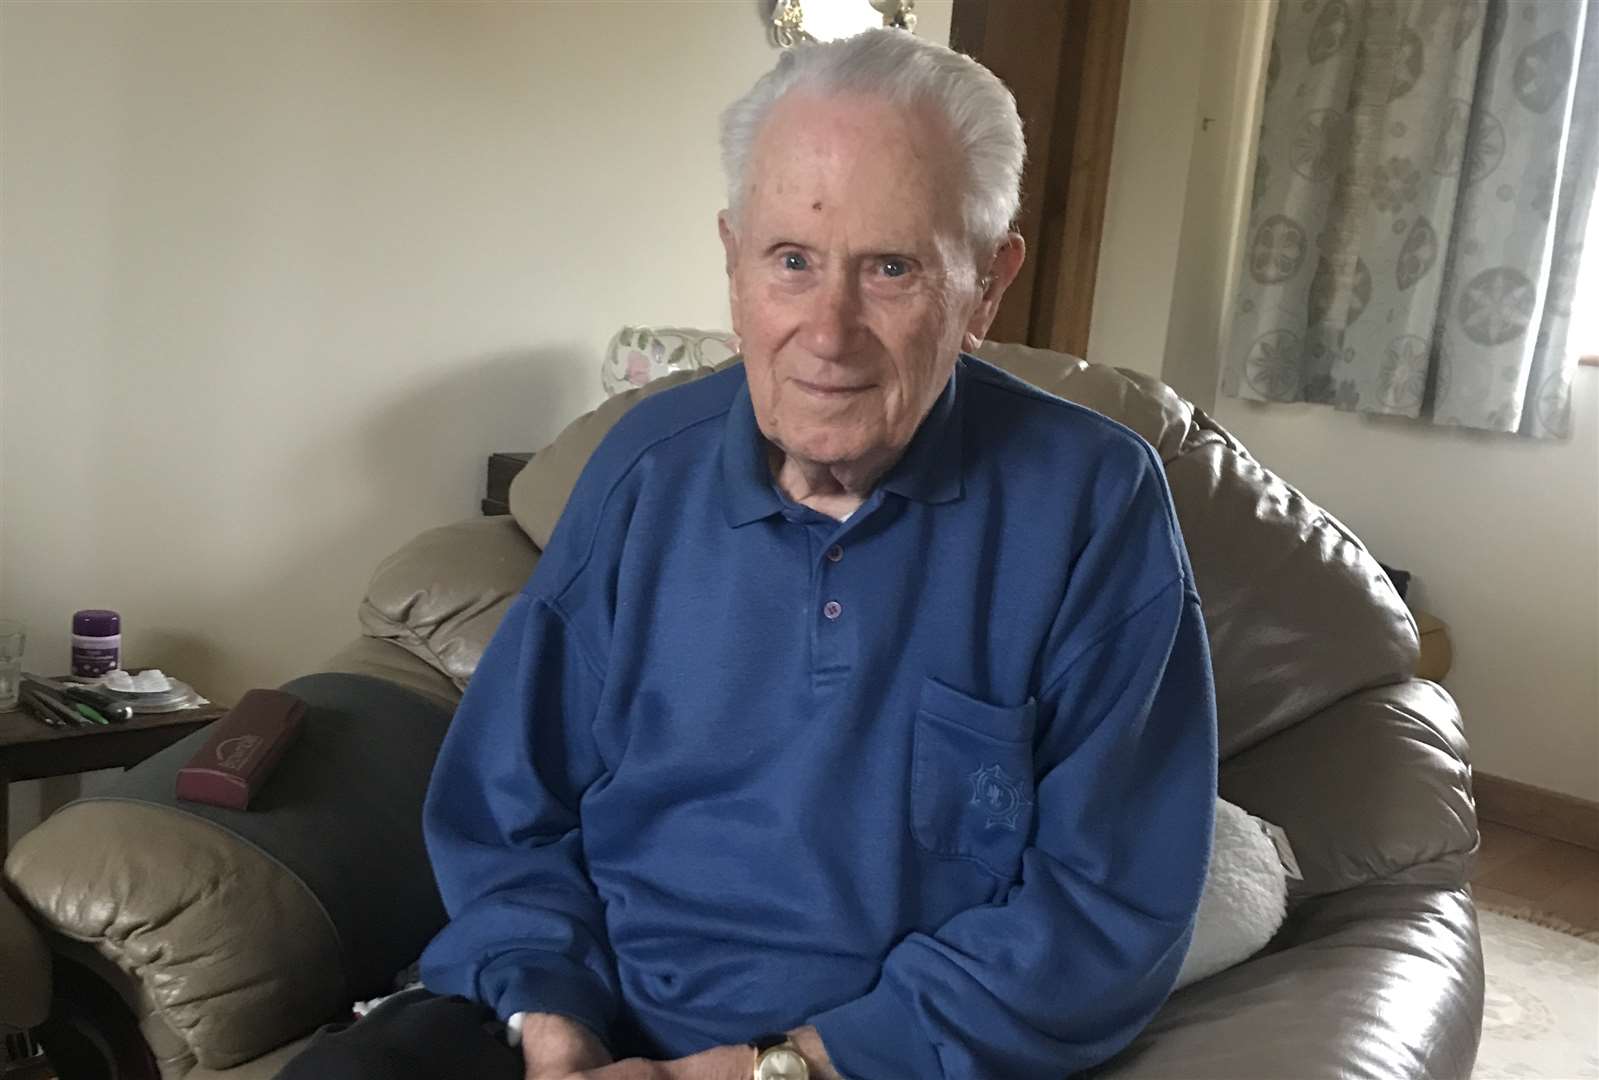 Harry Salmons, now age 90, who was a young engineer at Stanhay’s when the bomb struck, killing 14 of his work colleagues and wrecking the building, above